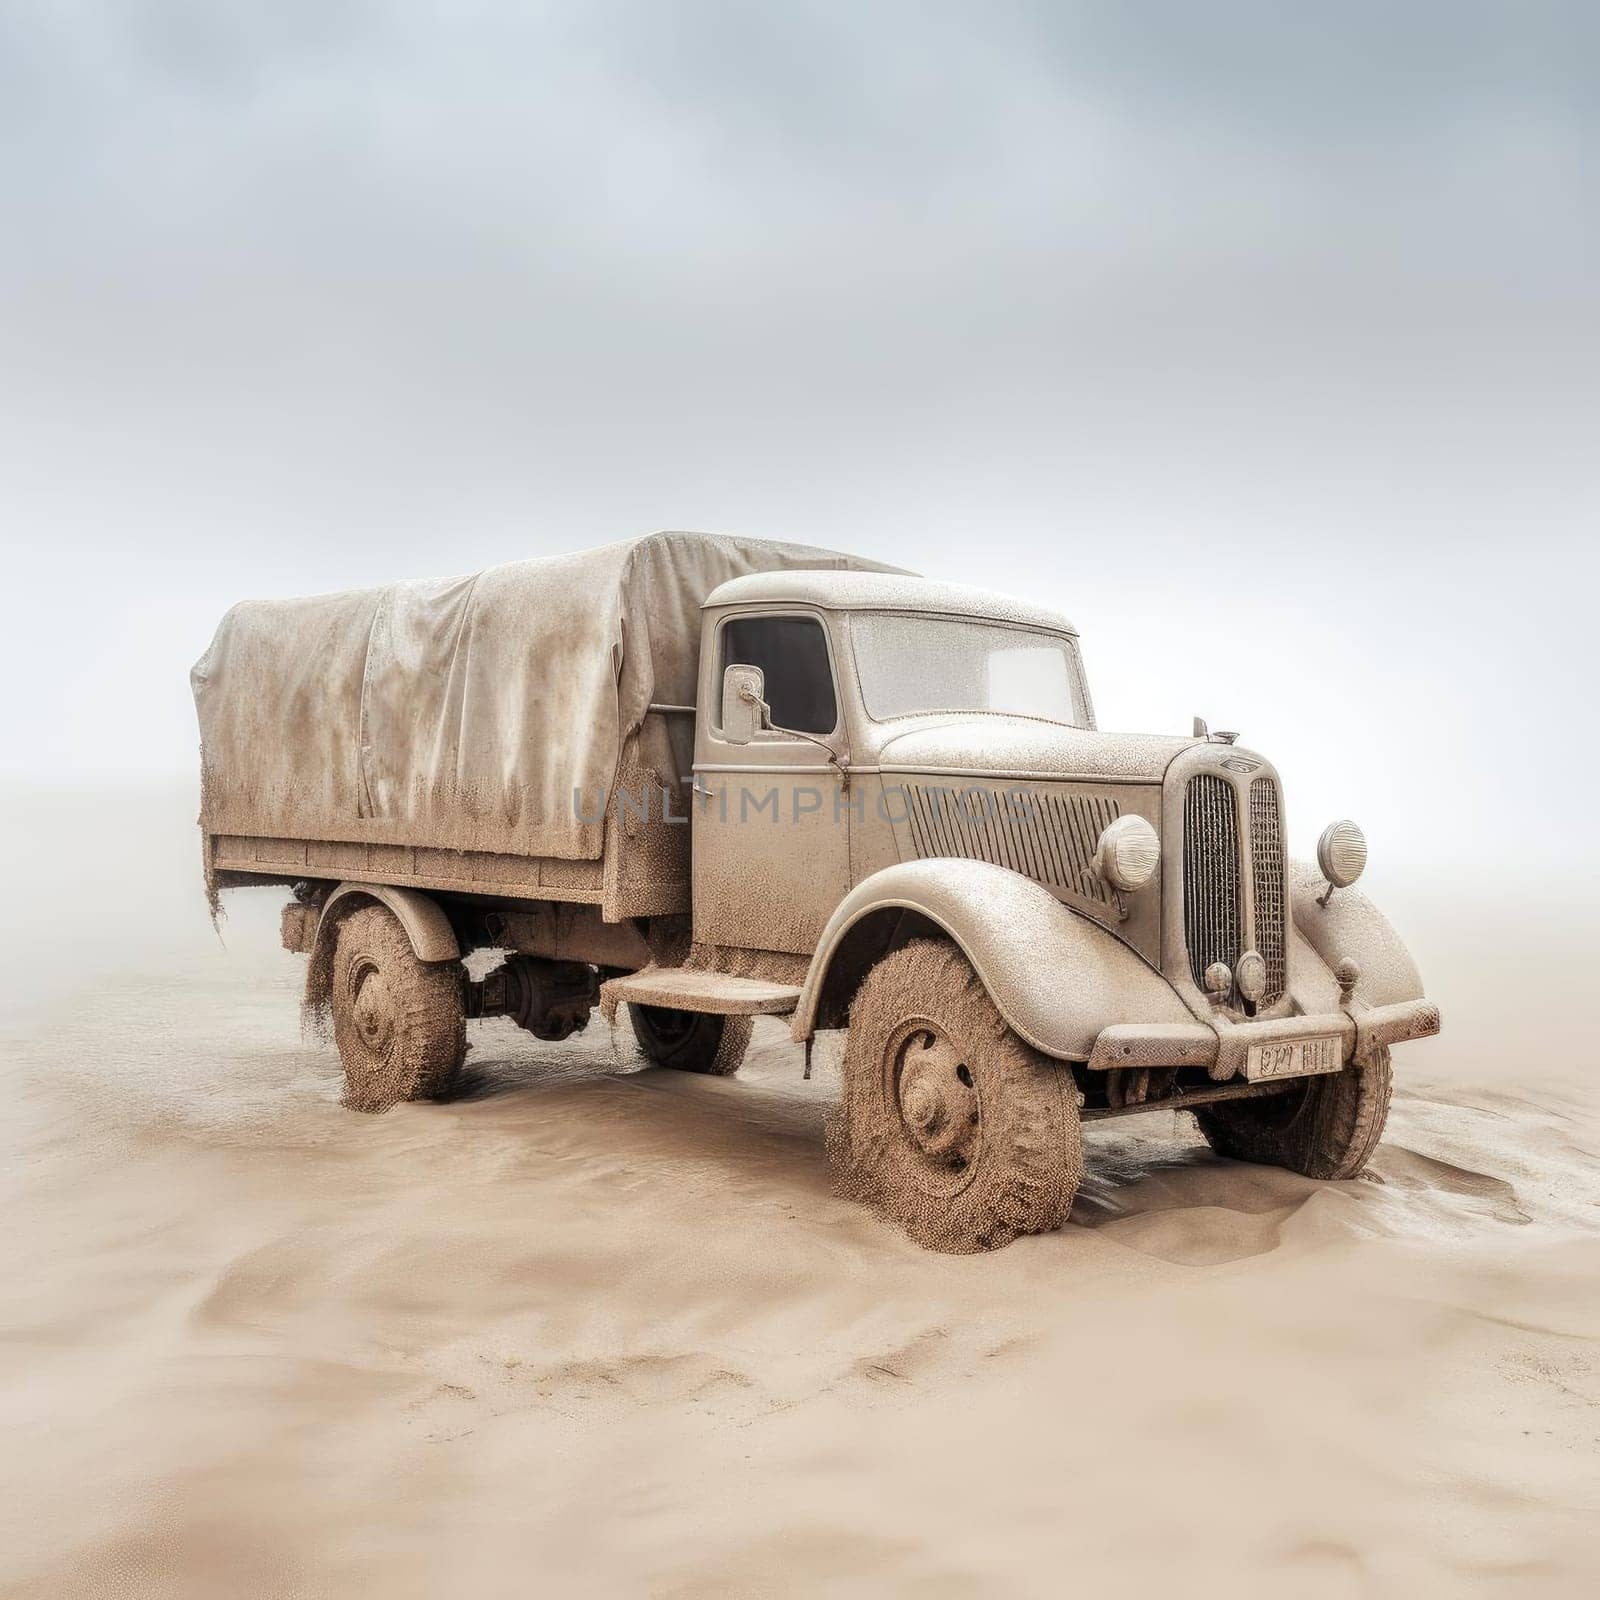 Old truck in the desert on a foggy day by eduardobellotto